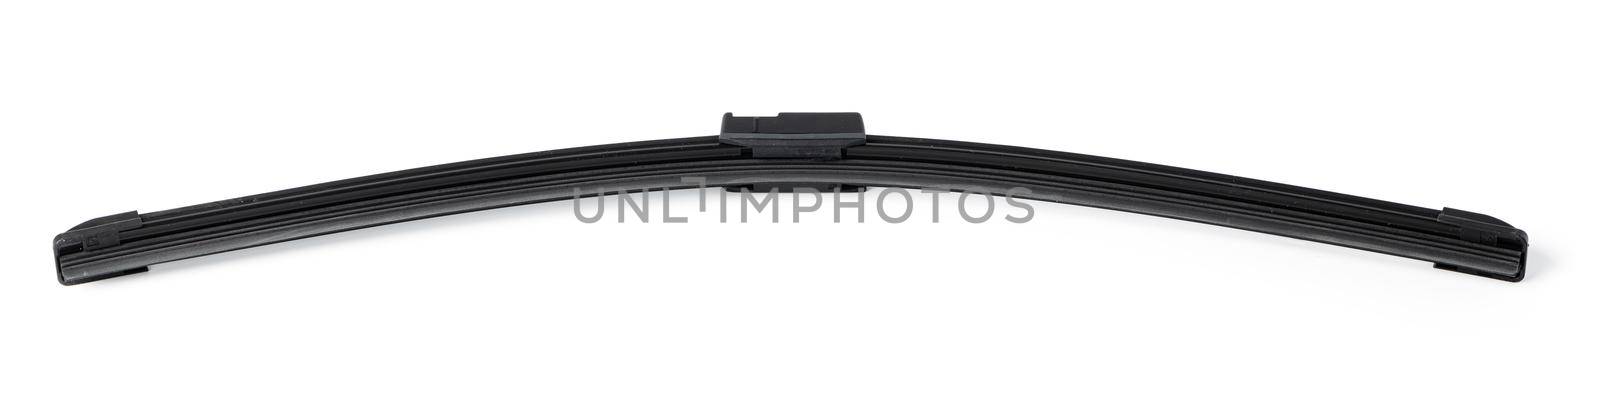 Windshield wipers for cars on a white background. Car part. by Fabrikasimf